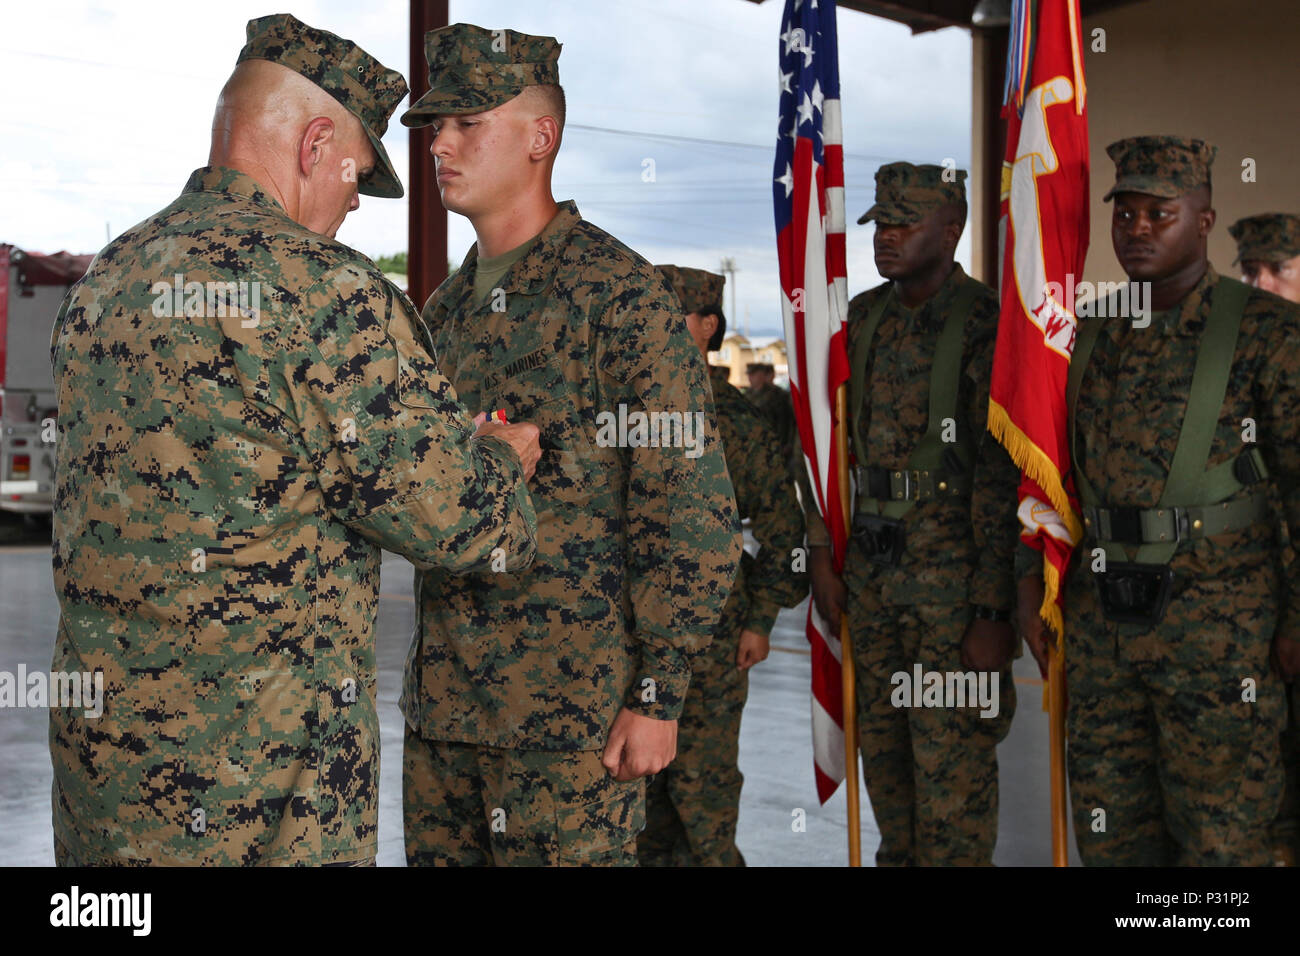 Commandant of the Marine Corps Gen. Robert B. Neller, left, pins a Navy and Marine Corps Medal on Lance Cpl. Duncan Harris, automotive maintenance technician, at Soto Cano Air Base, Honduras, Aug. 21, 2016. Harris was awarded medal for saving a child from drowning. (U.S. Marine Corps photo by Cpl. Samantha K. Braun/Released) Stock Photo